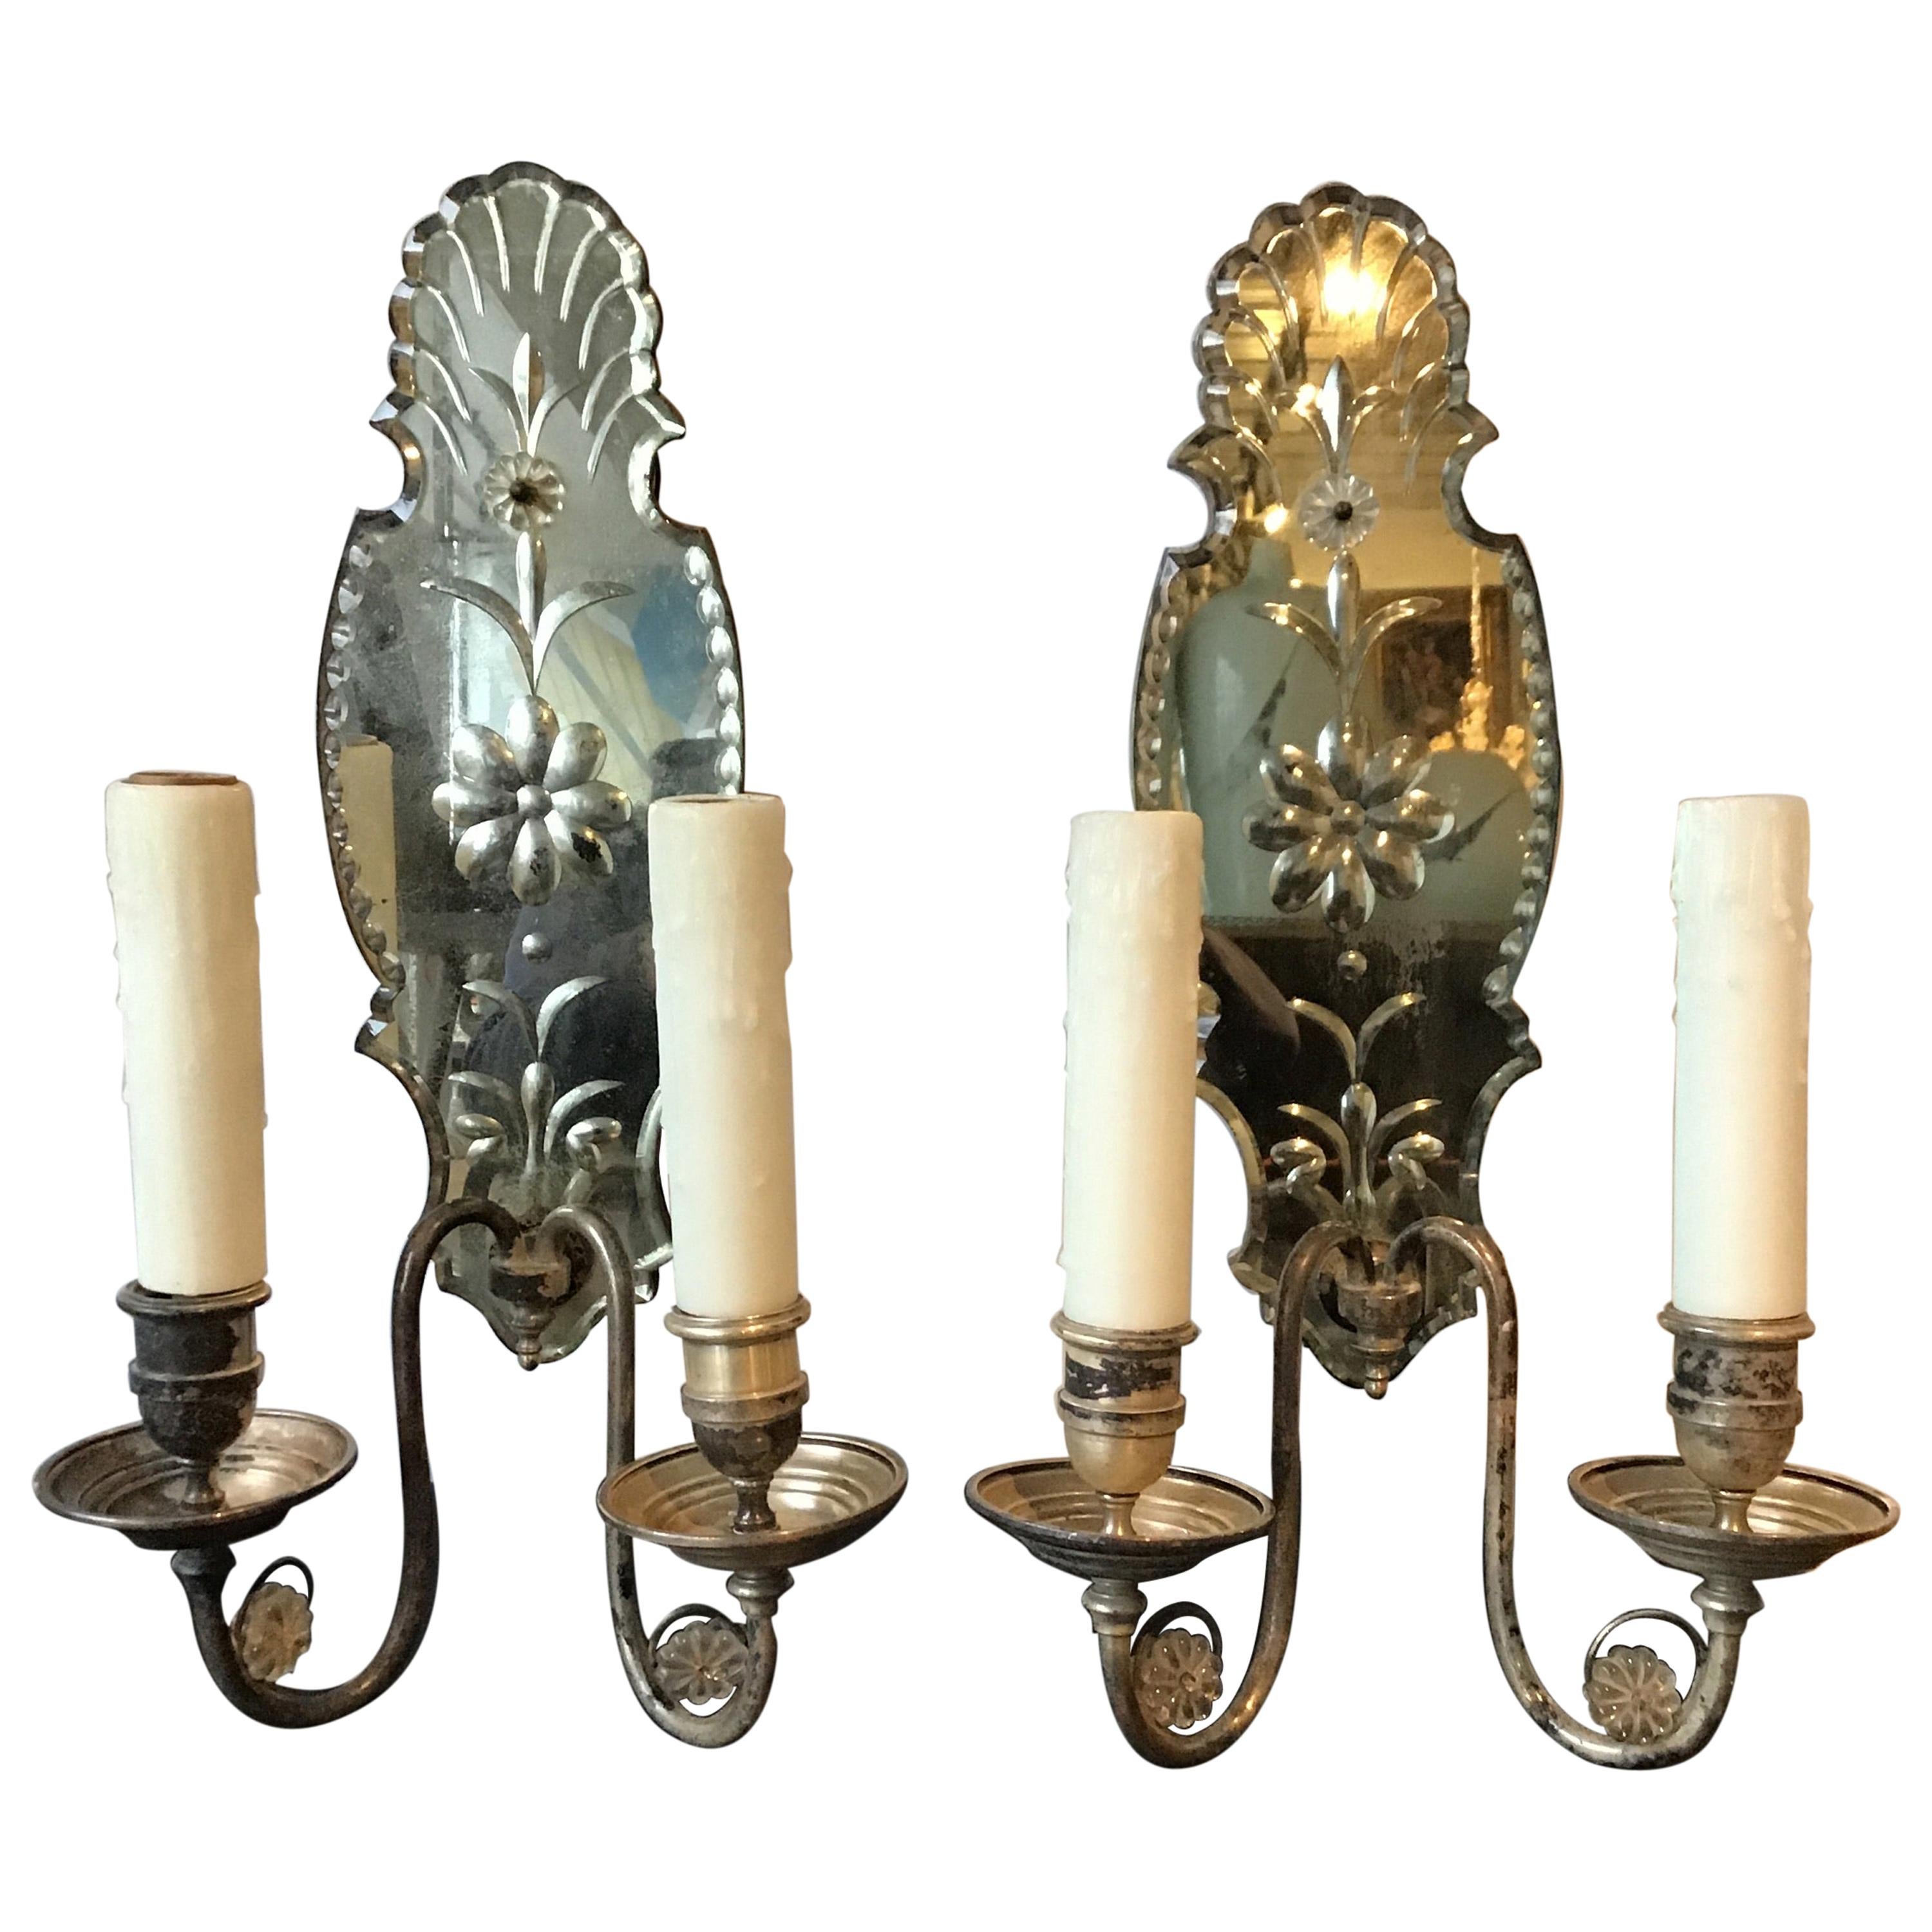 1920s Large Mirrored Sconces For Sale